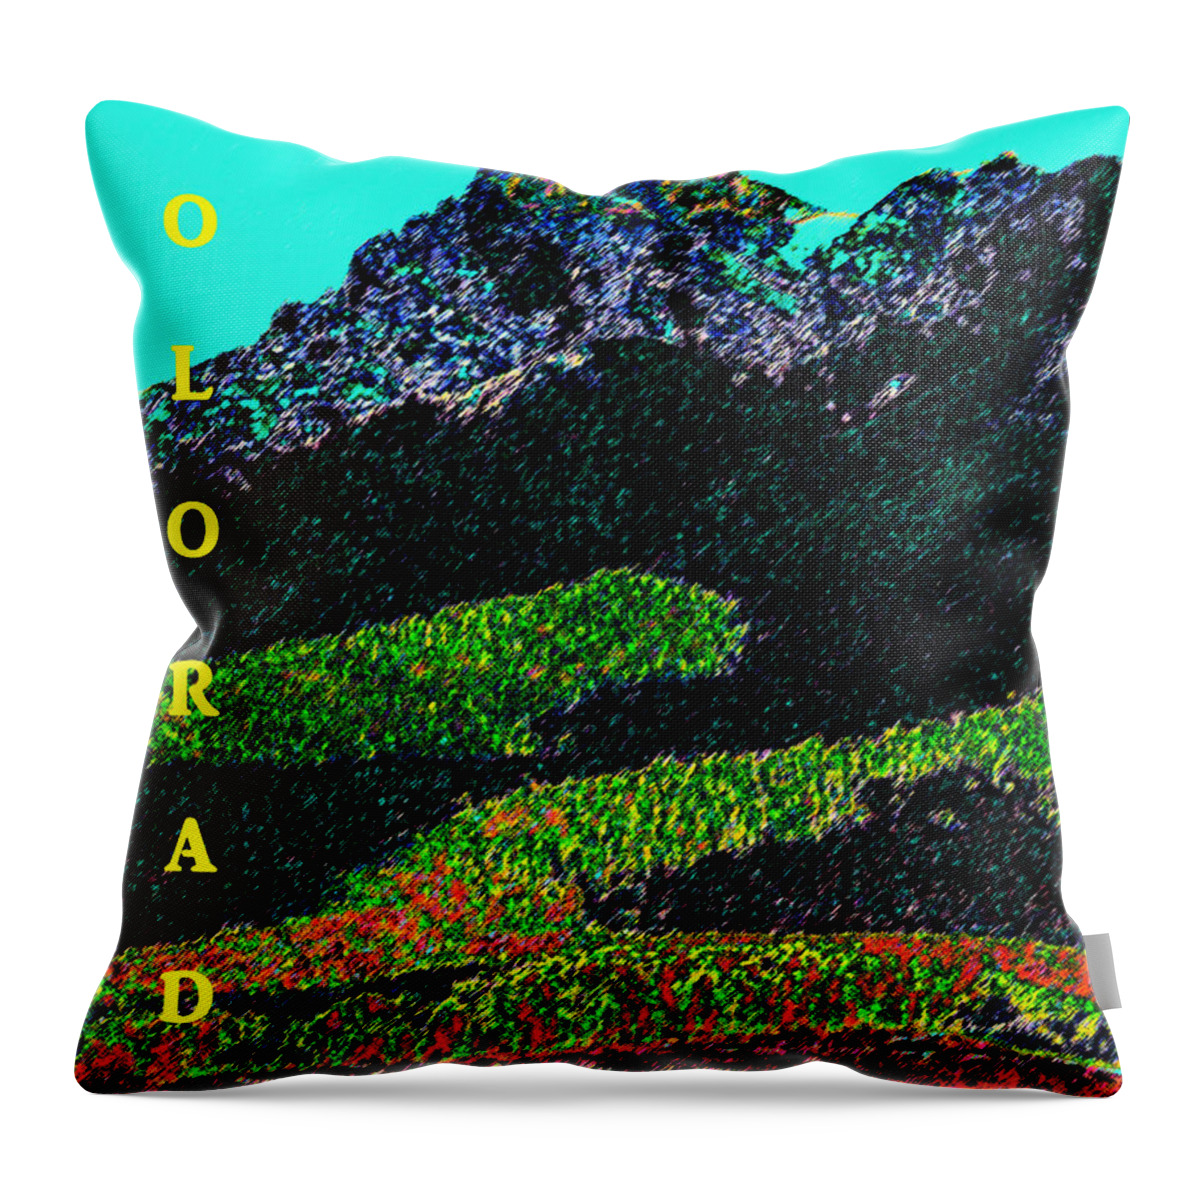 Colorado Throw Pillow featuring the painting Colorful Colorado by David Lee Thompson